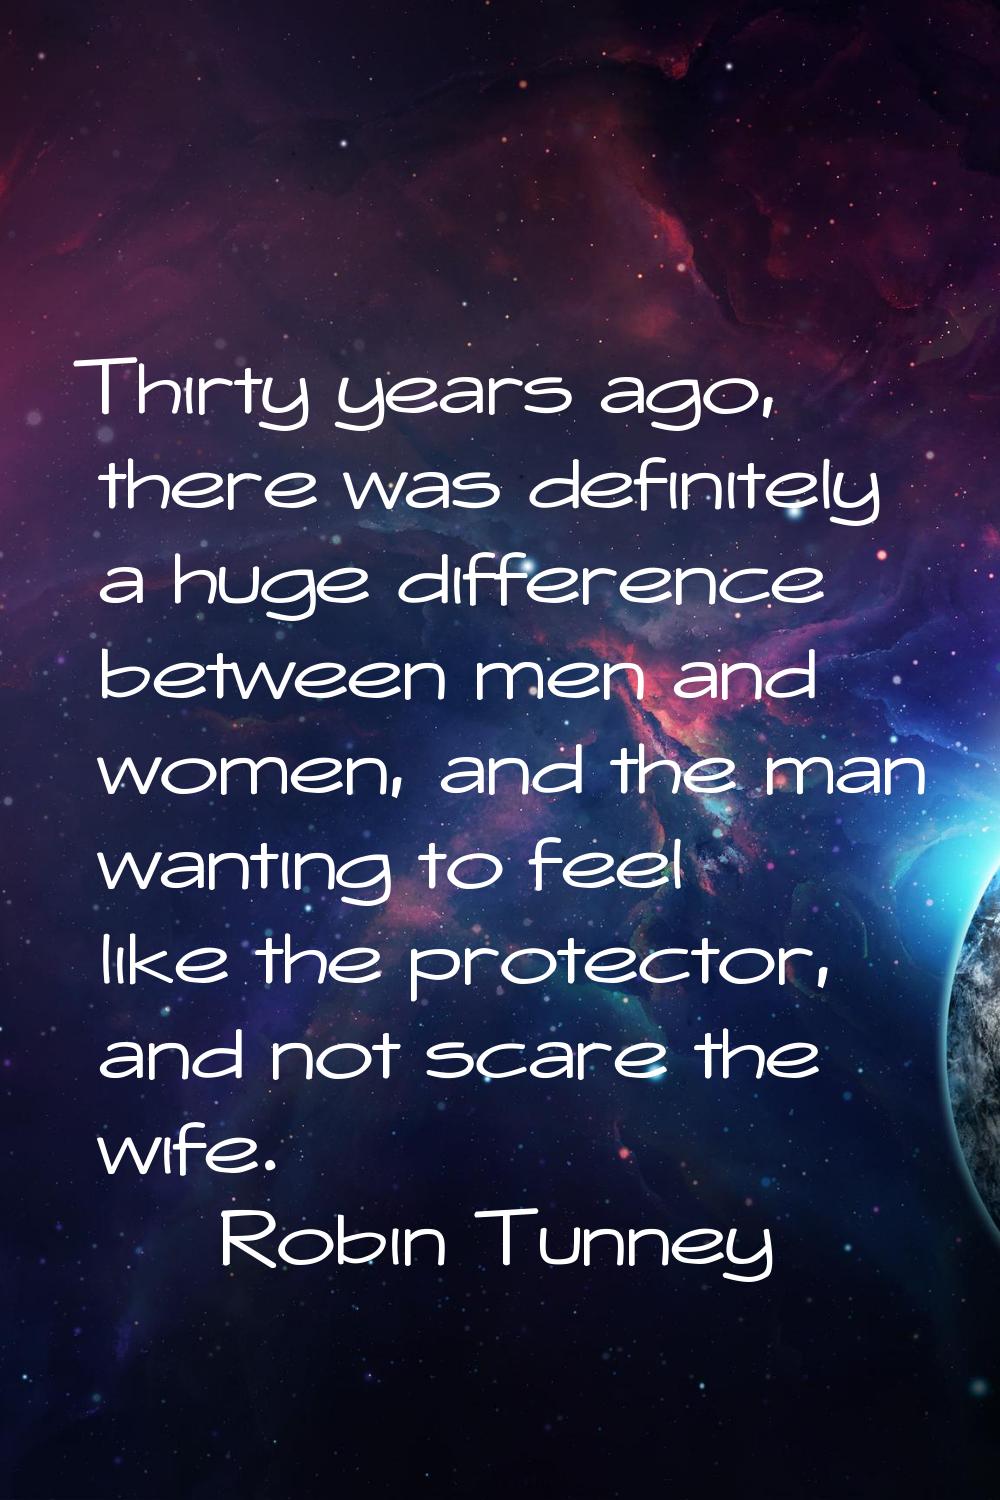 Thirty years ago, there was definitely a huge difference between men and women, and the man wanting